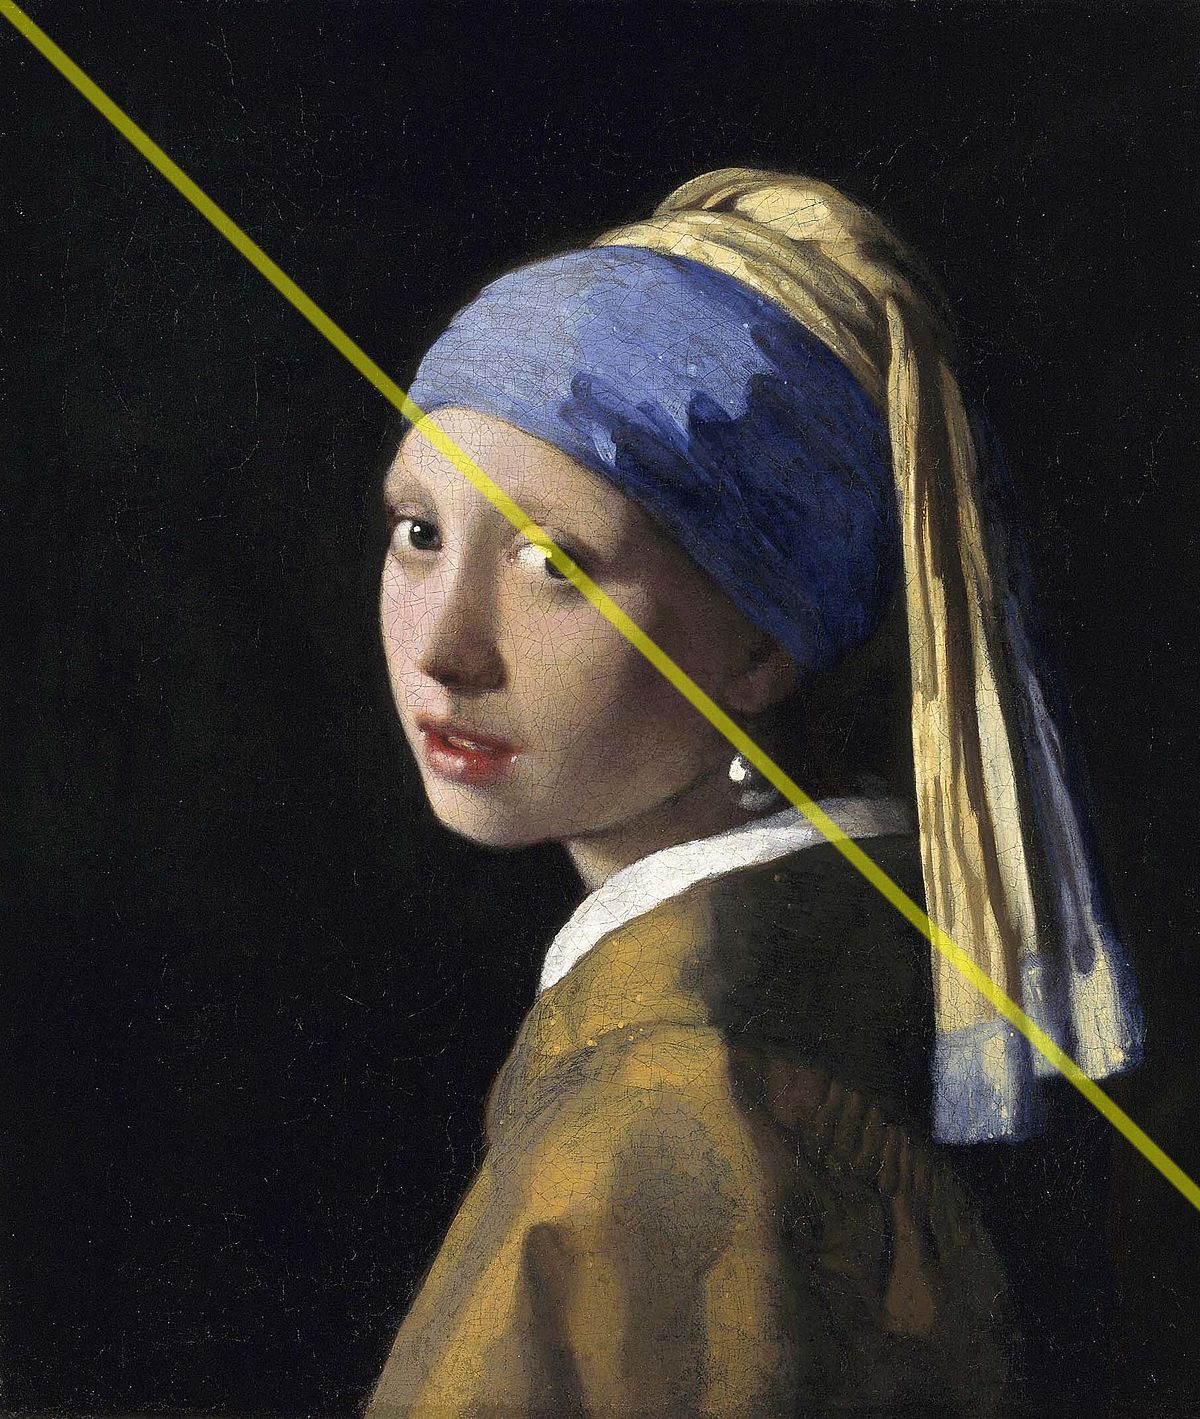 Why Is Vermeer's Girl with a Pearl Earring So Famous?